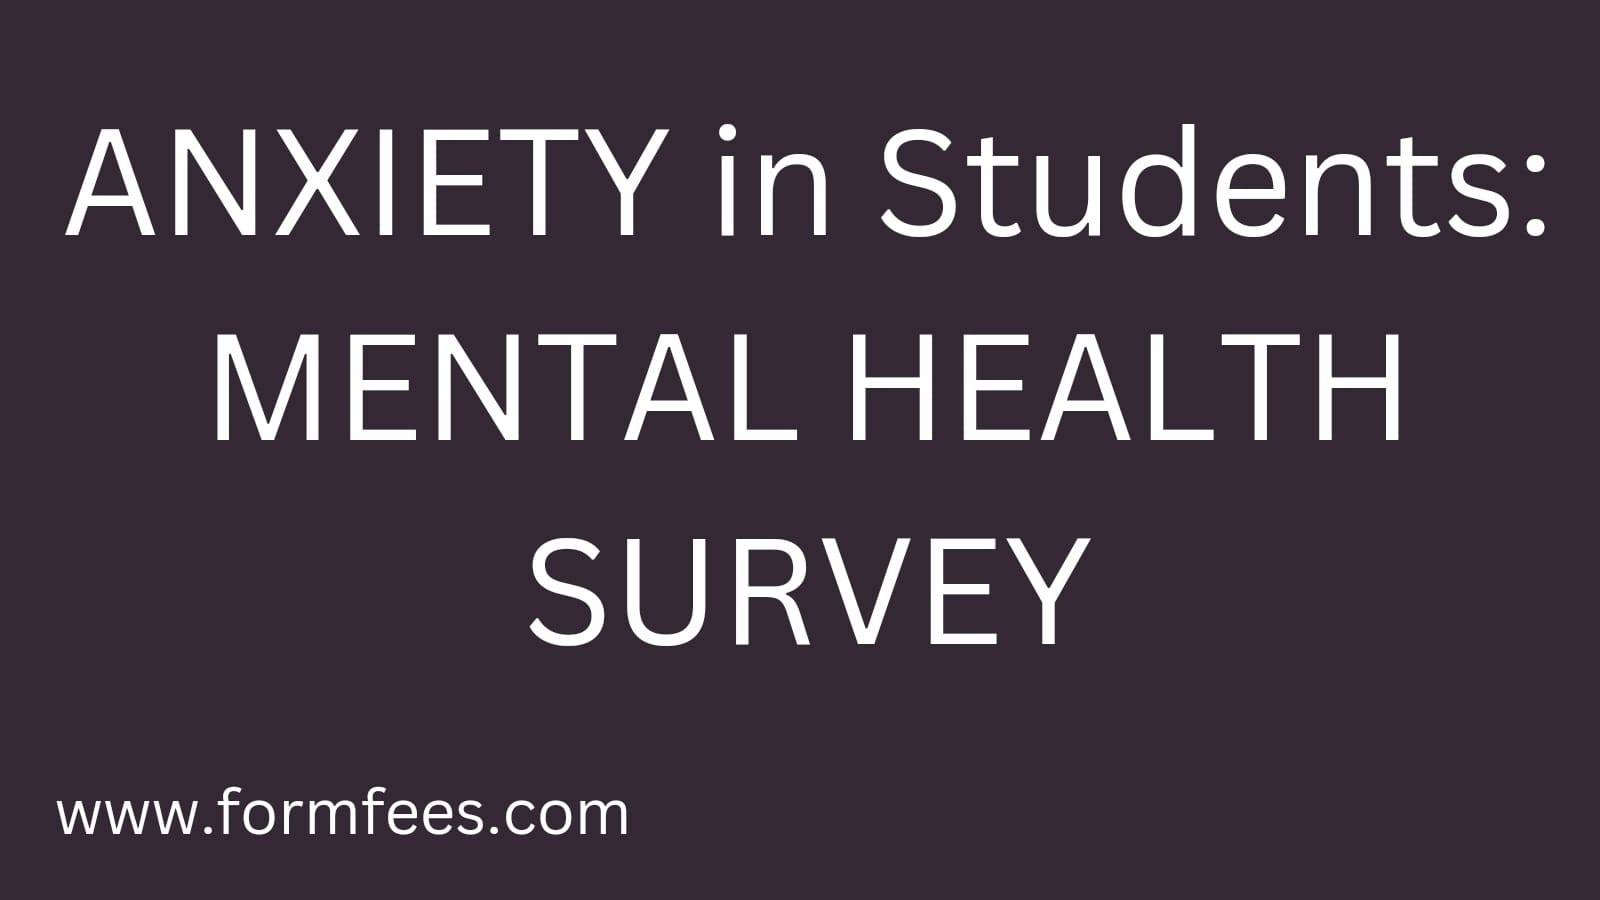 ANXIETY in Students MENTAL HEALTH